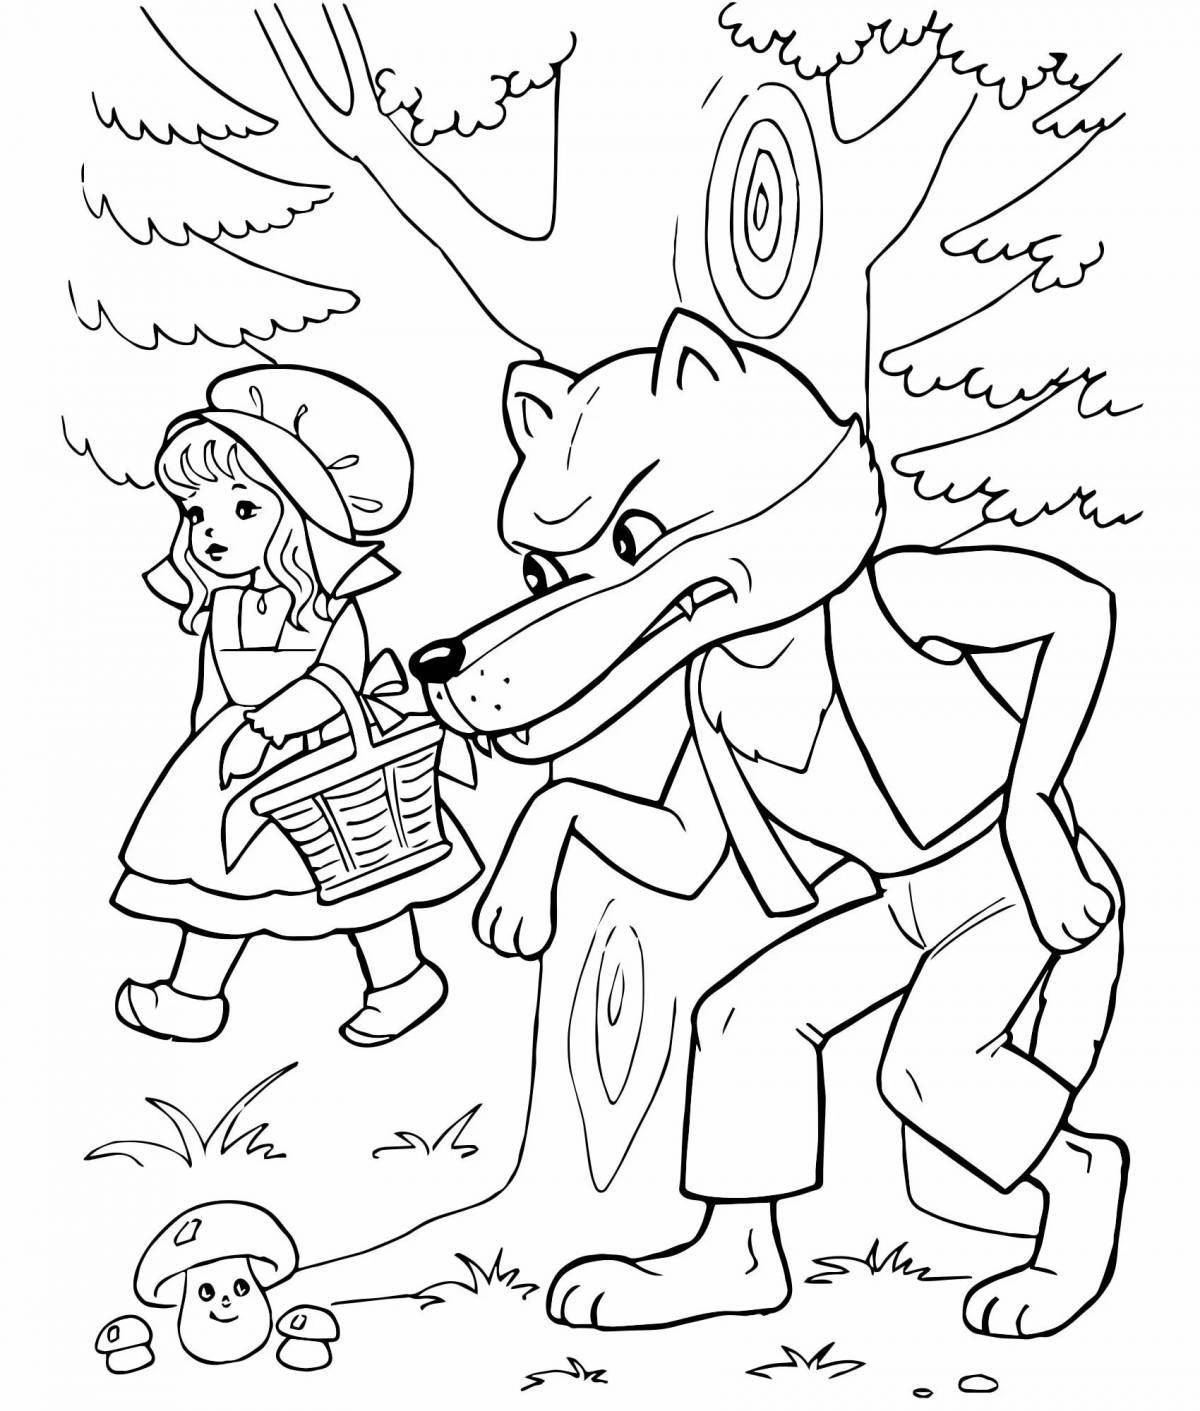 The spectacular adventures of Peter and the wolf